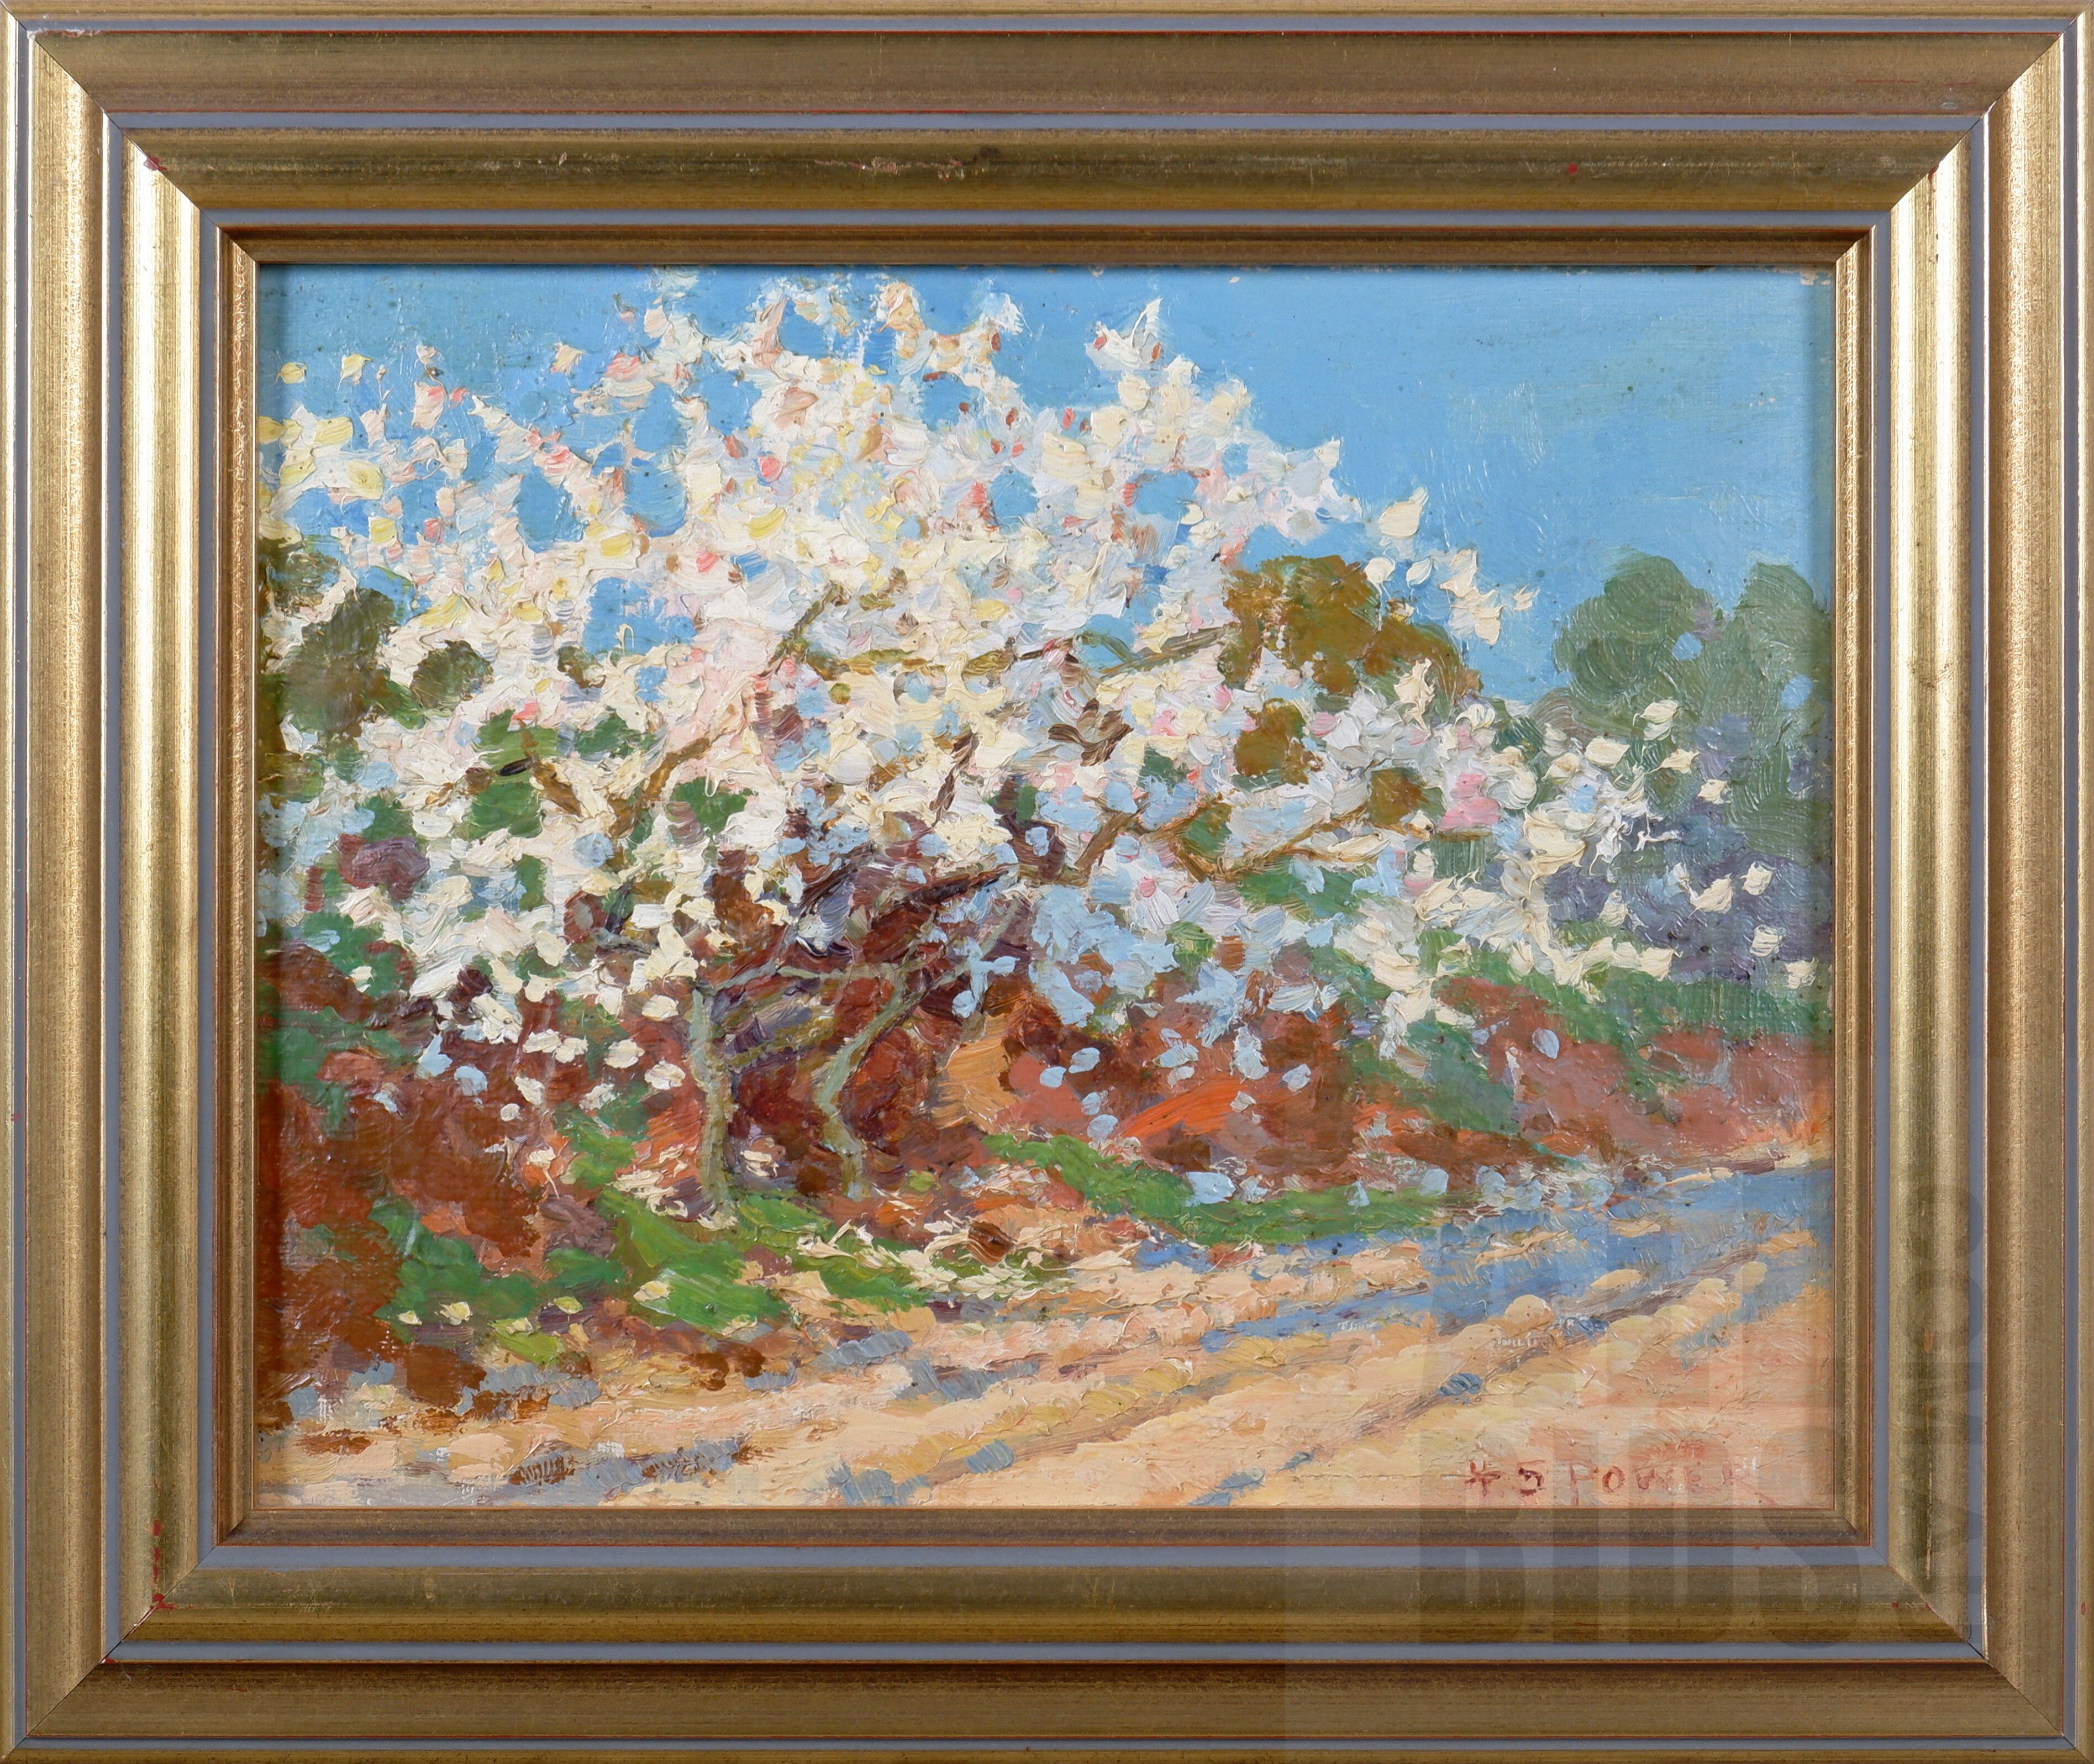 'Harold Septimus Power (1878-1951), Untitled (Spring Blossoms), Oil on Card, 19 x 24 cm'